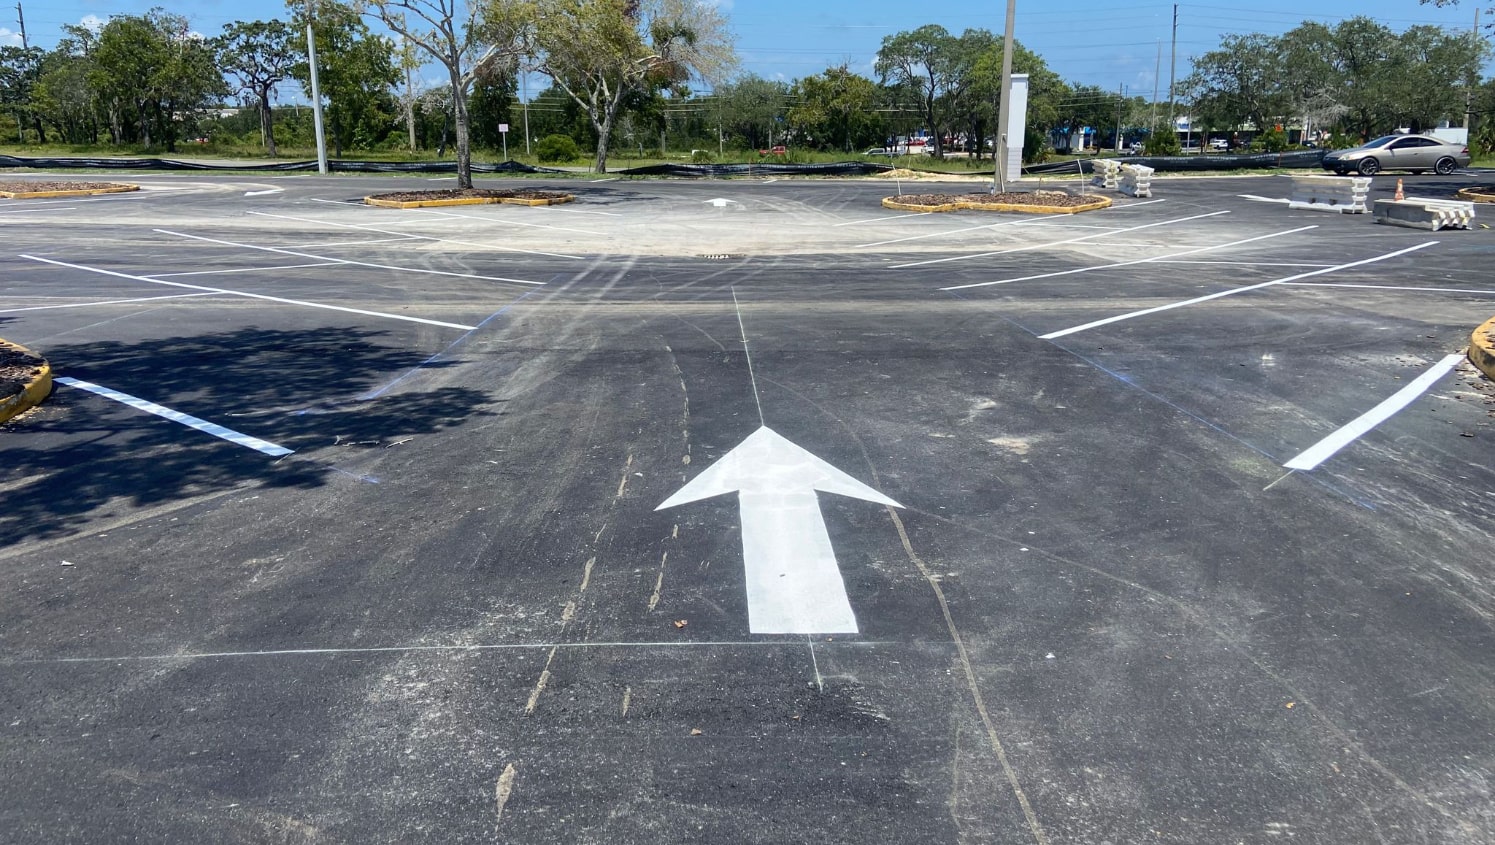 parking lot arrow in springhill, fl shopping plaza